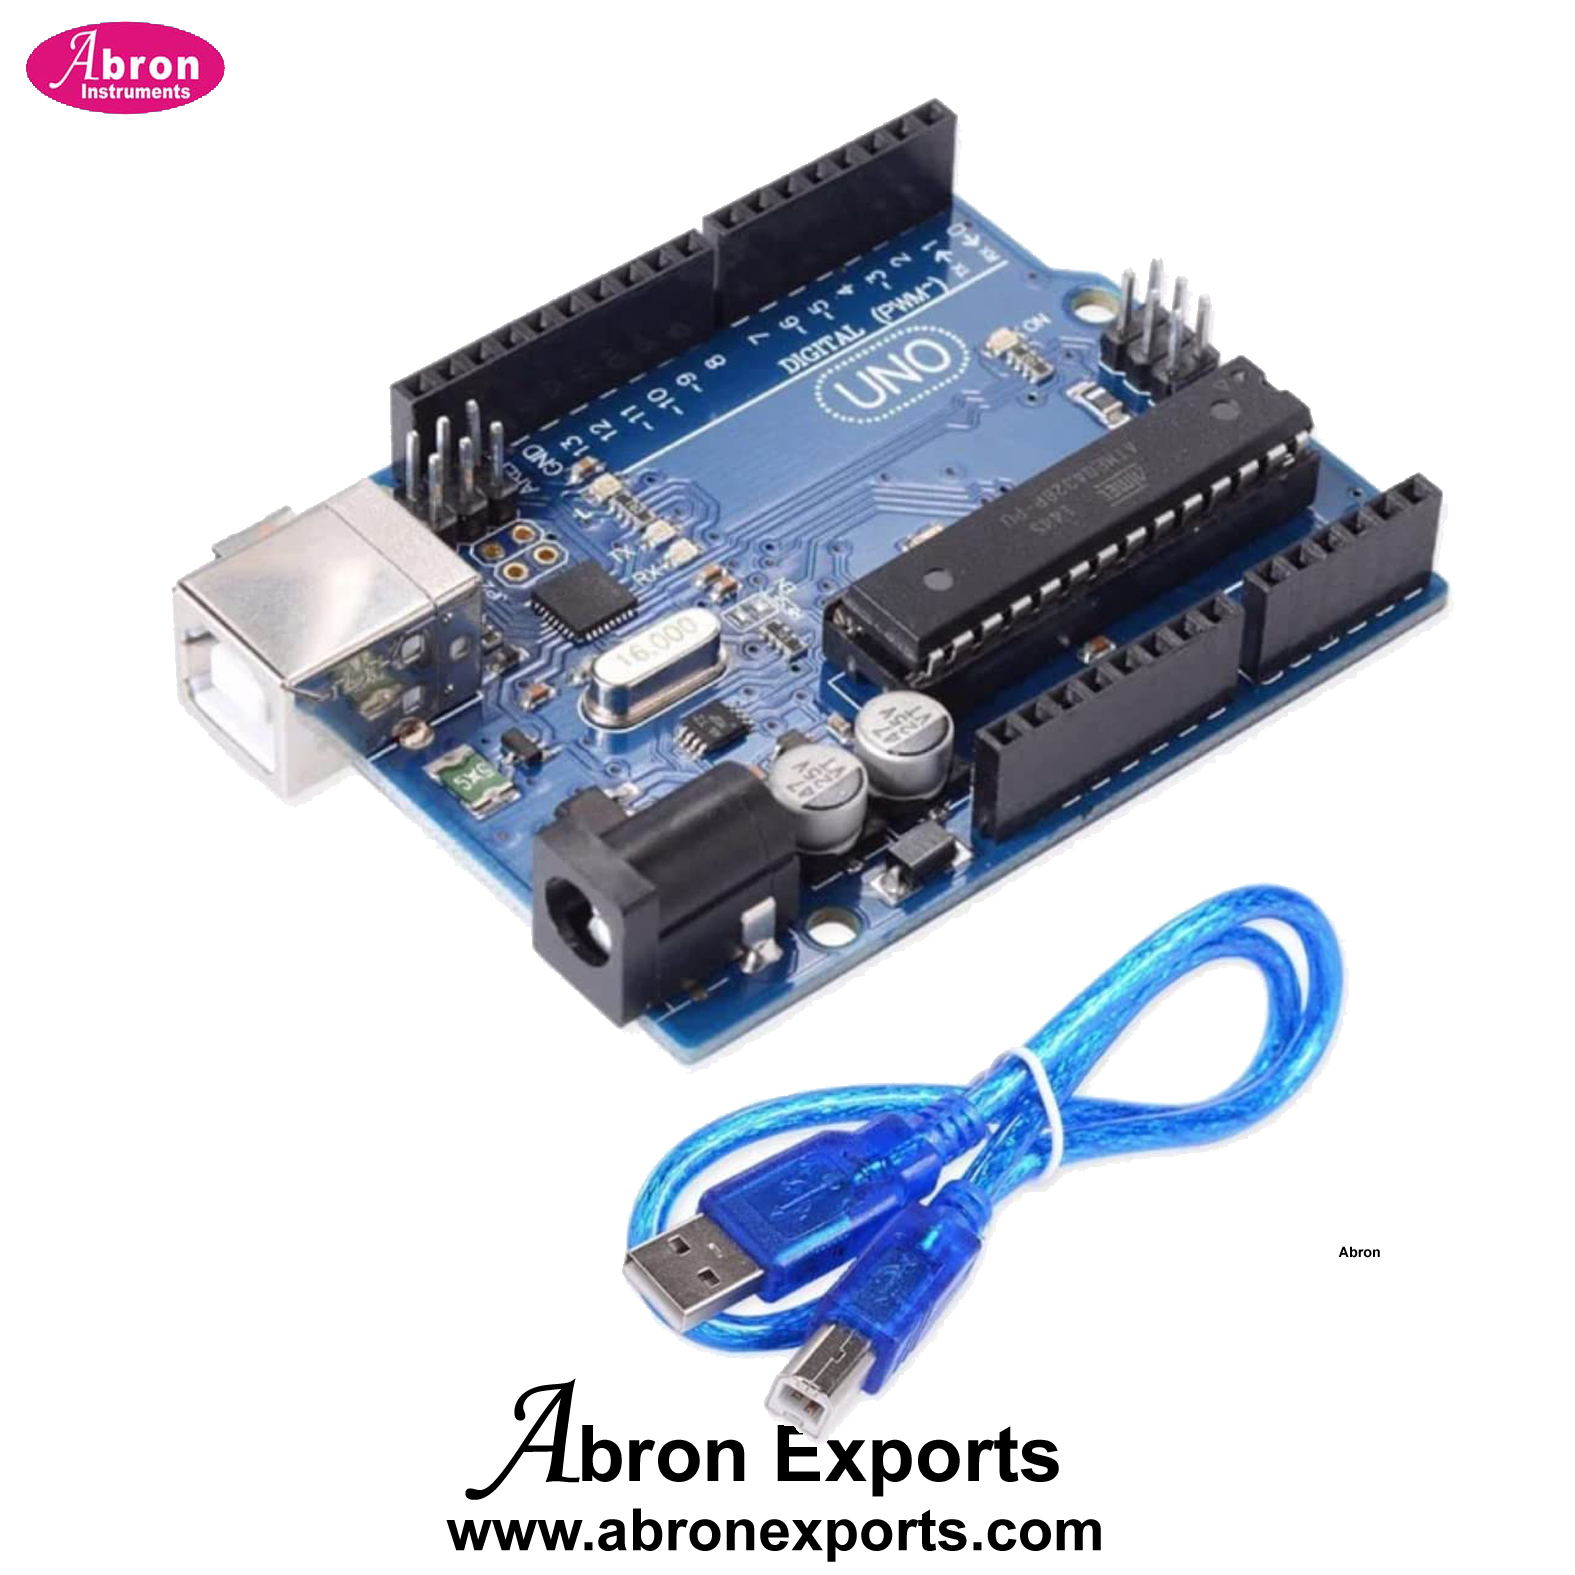 Programmable Microcontroller with USB wire-Arduino Uno R3 with USB Cable Uno Board with ATmega328 chip AE-1305U